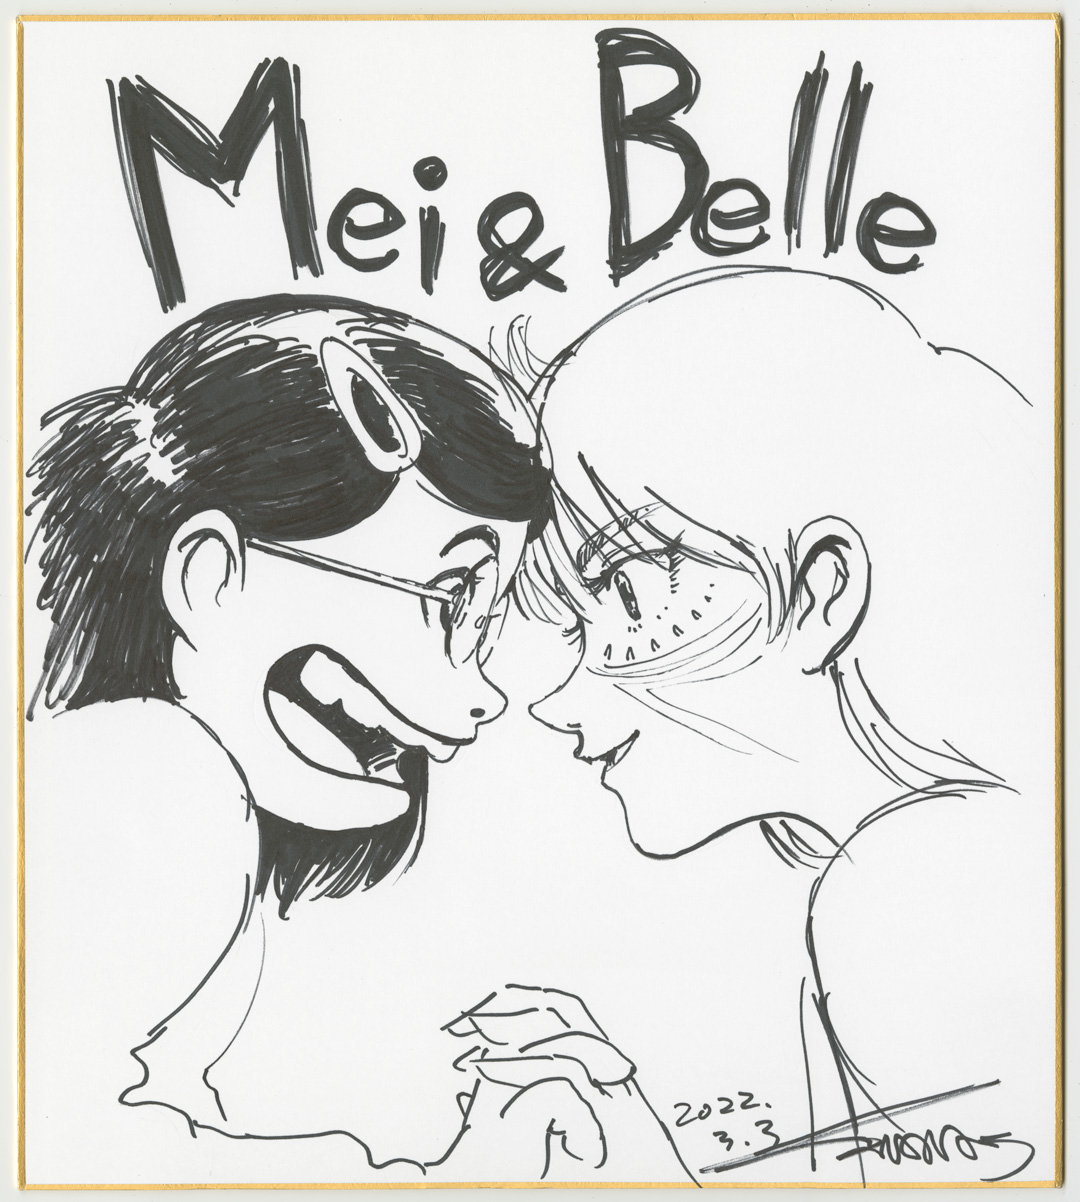 The protagonists of Turning Red and BELLE, Mei and Belle, locking hands